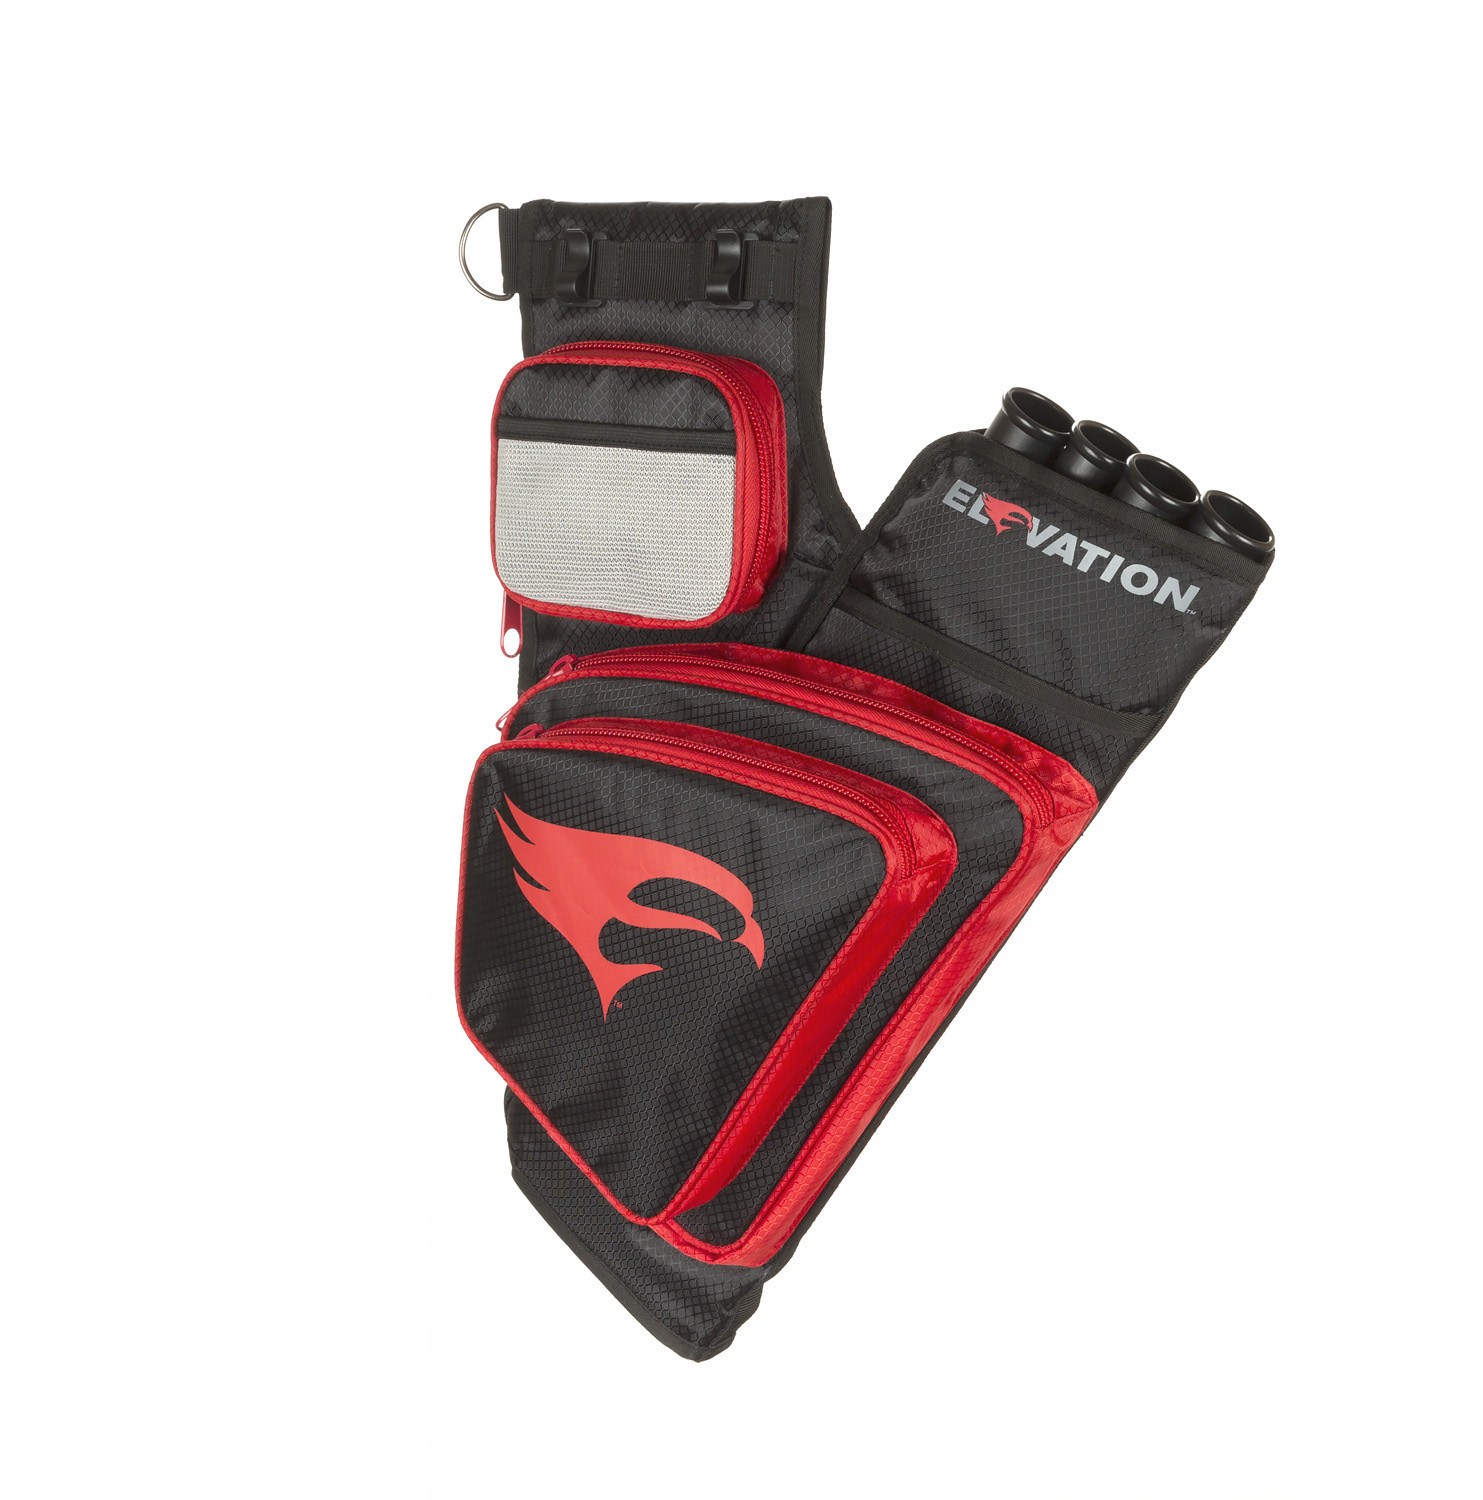 Elevation Transition Quiver Black/Red 4 Tube Right Hand 